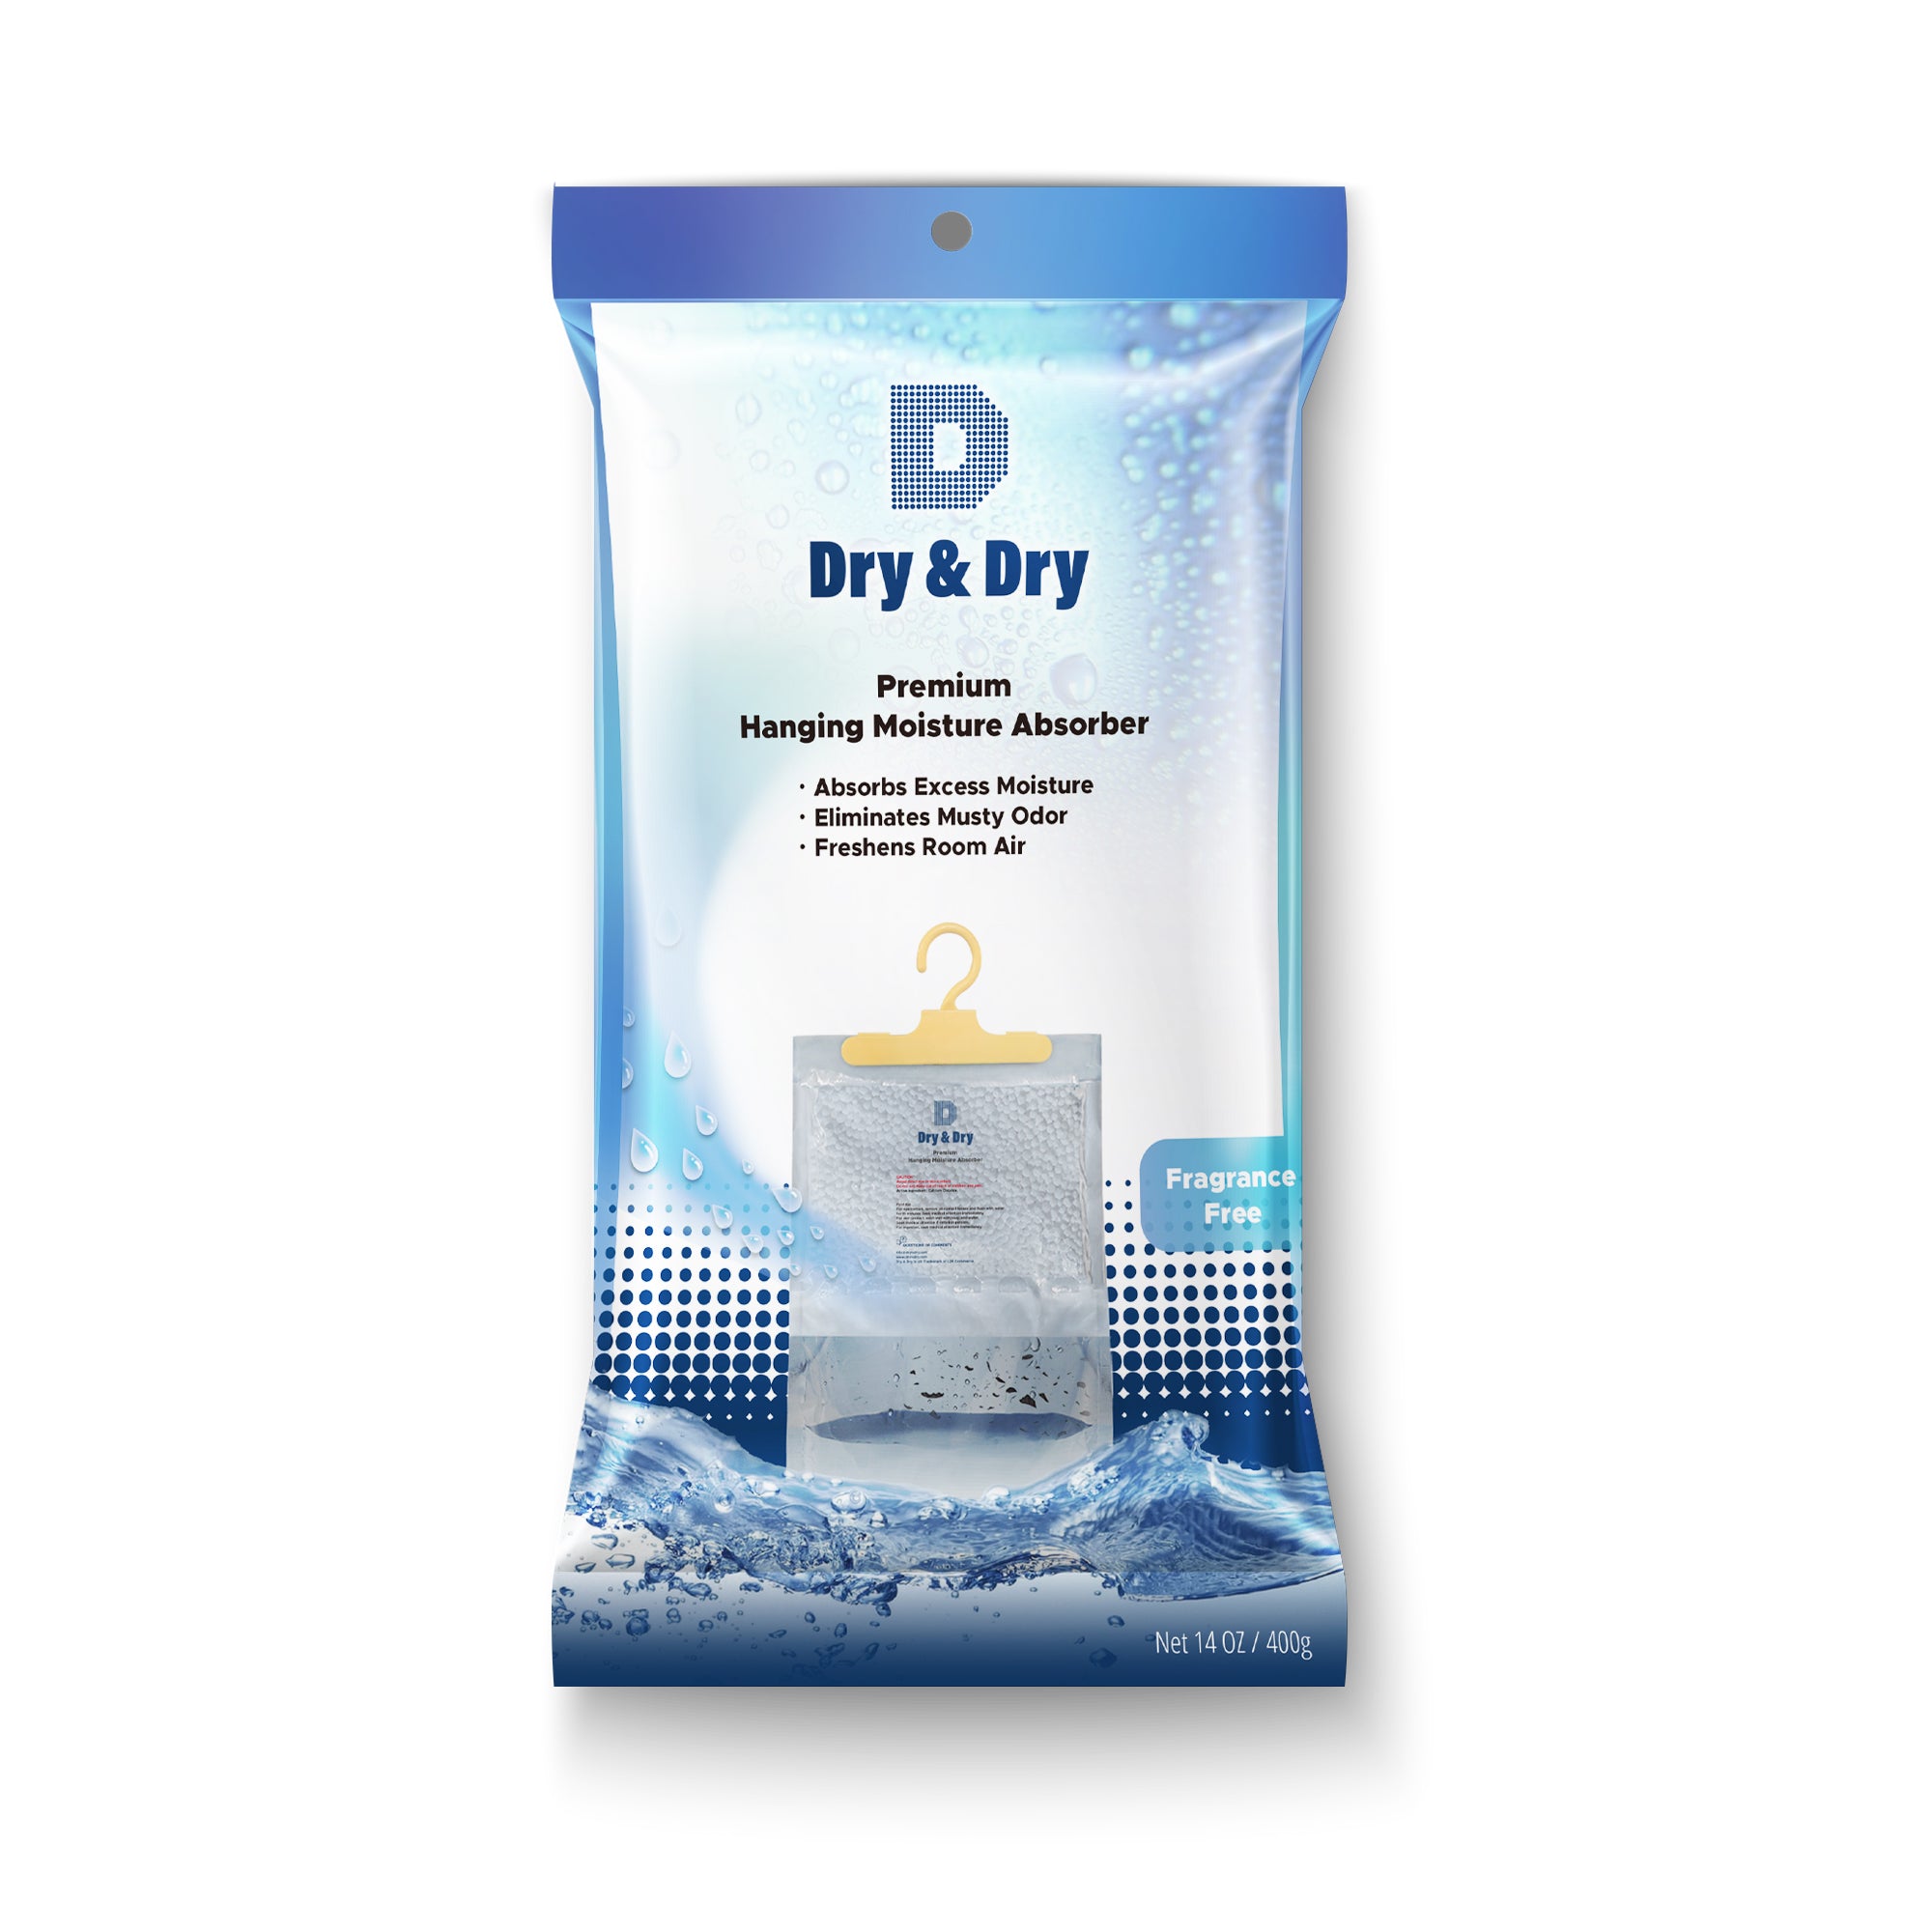 [6 pack] [Net 14 oz/Pack] “Dry & Dry” Premium Hanging Moisture Absorber to Control Excess Moisture for Basements, Bathrooms, Laundry Rooms, and Enclosed Spaces